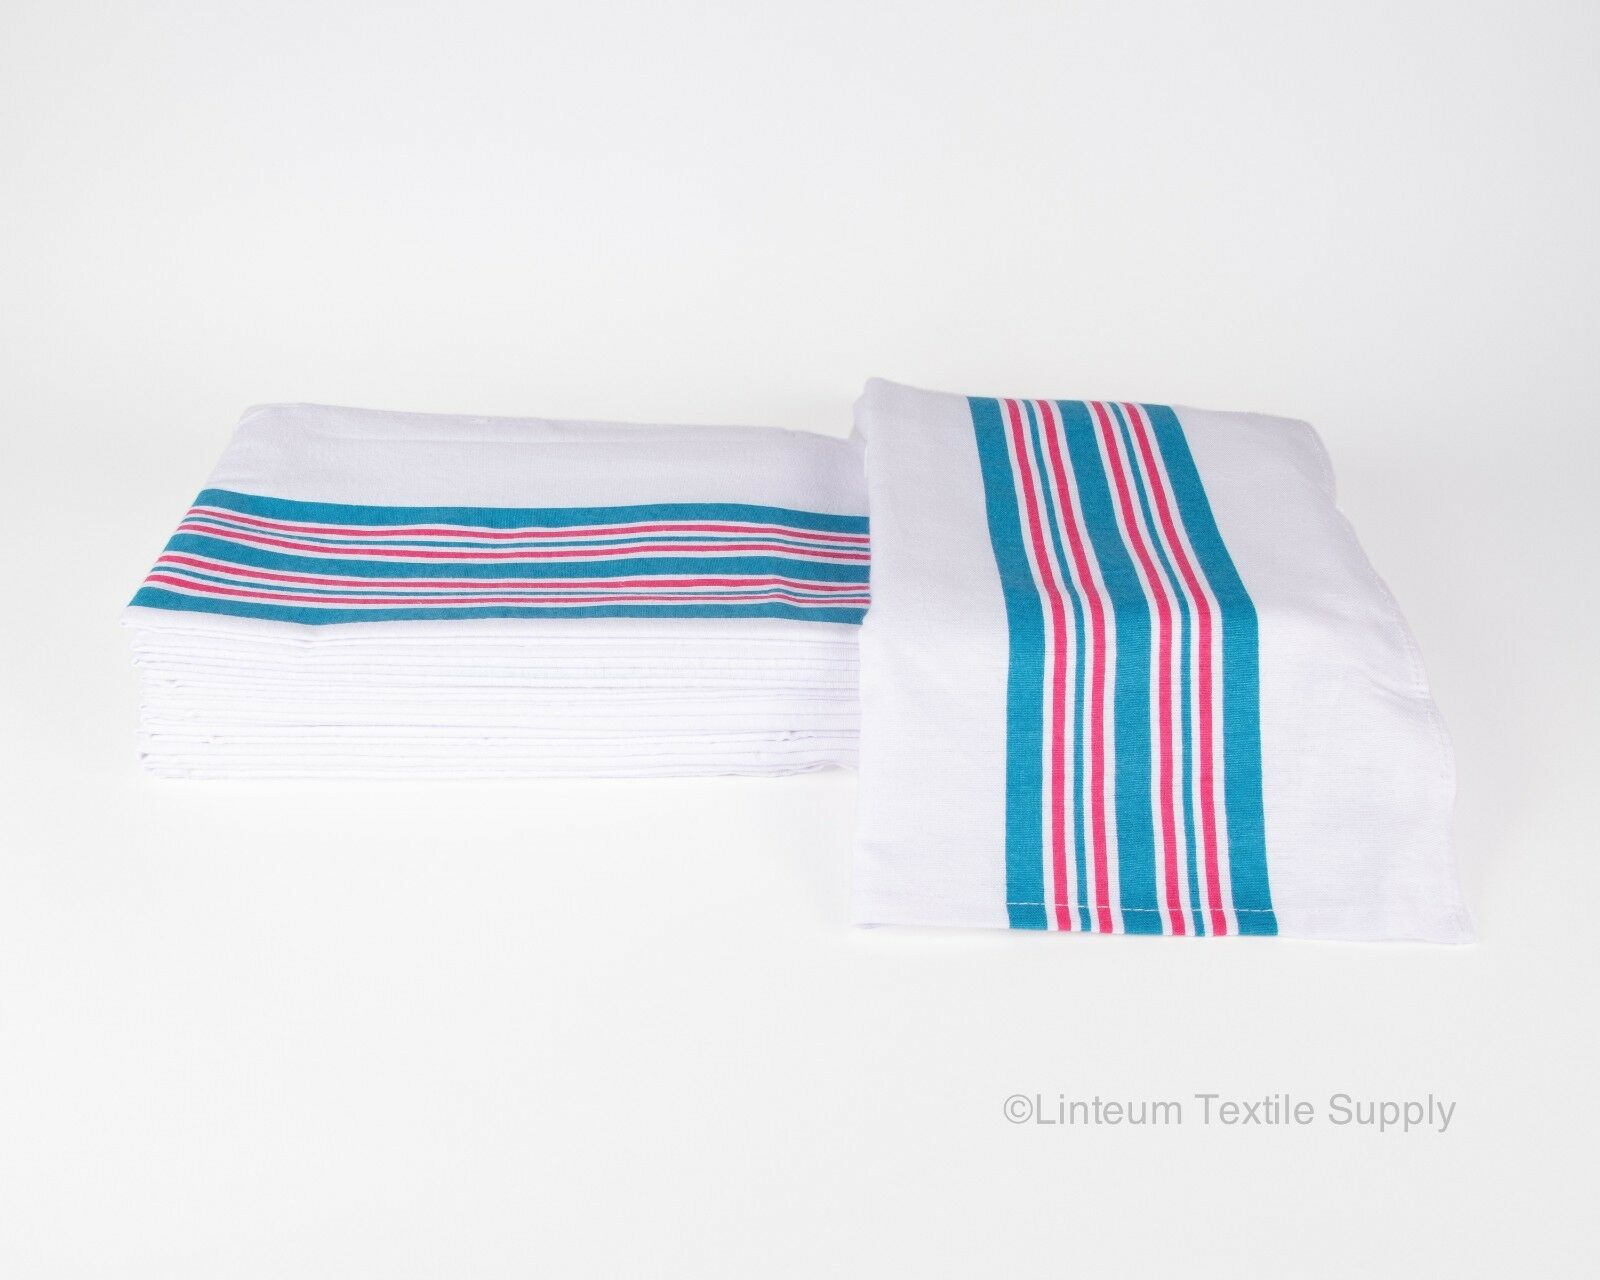 Linteum Textile (3-pack, 30x40 In) Receiving Hospital Baby Blankets, 100% Cotton